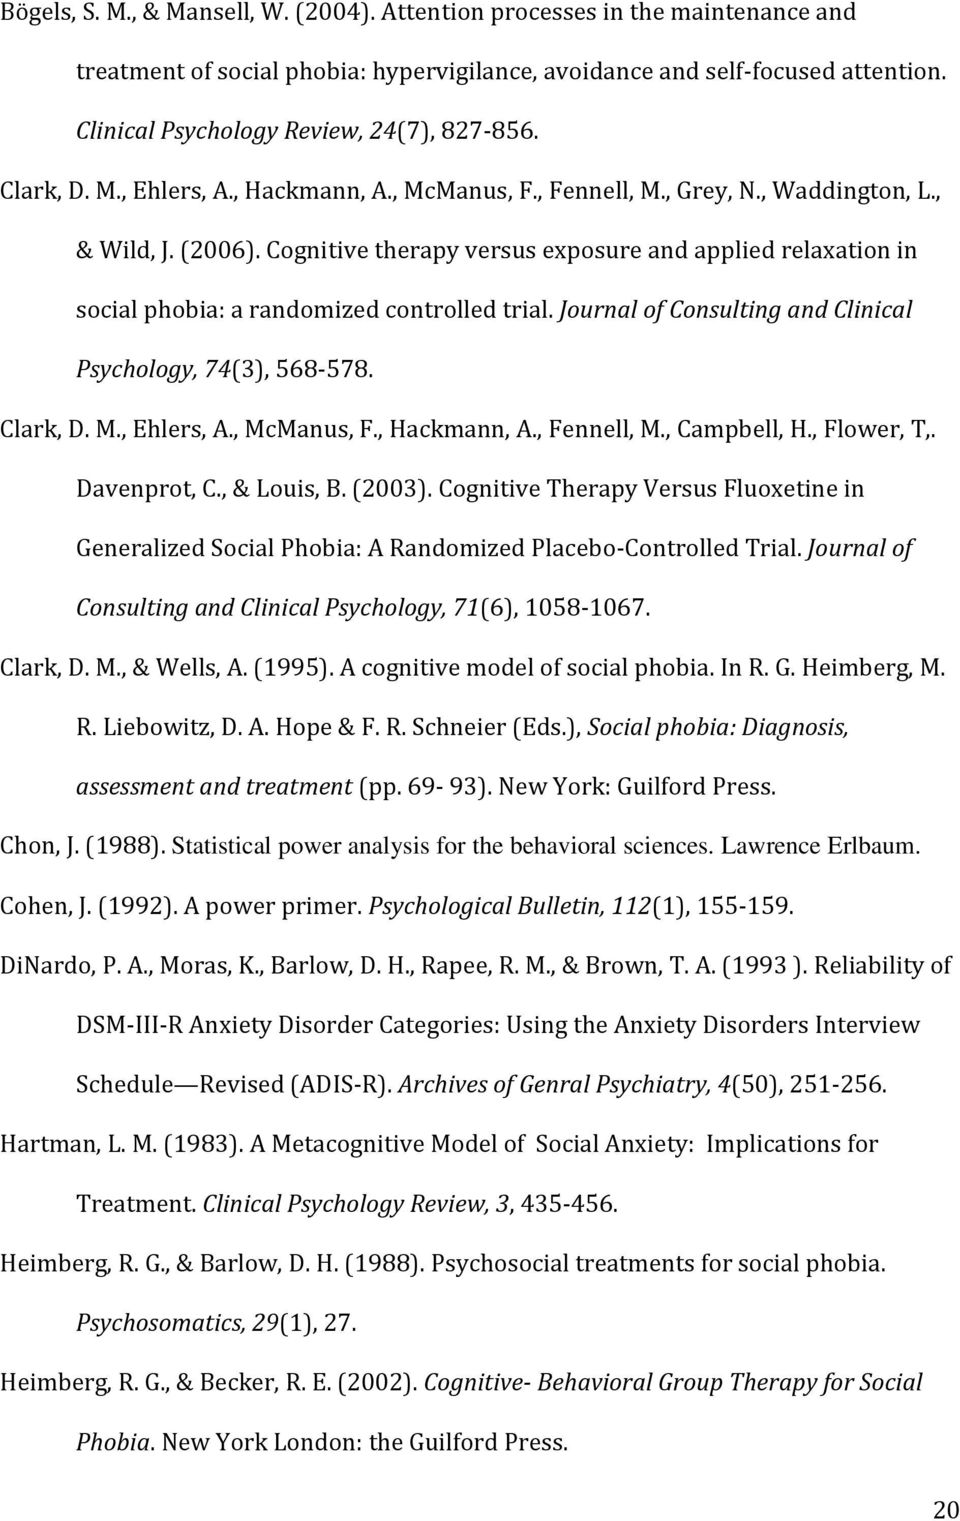 Cognitive therapy versus exposure and applied relaxation in social phobia: a randomized controlled trial. Journal of Consulting and Clinical Psychology, 74(3), 568-578. Clark, D. M., Ehlers, A.